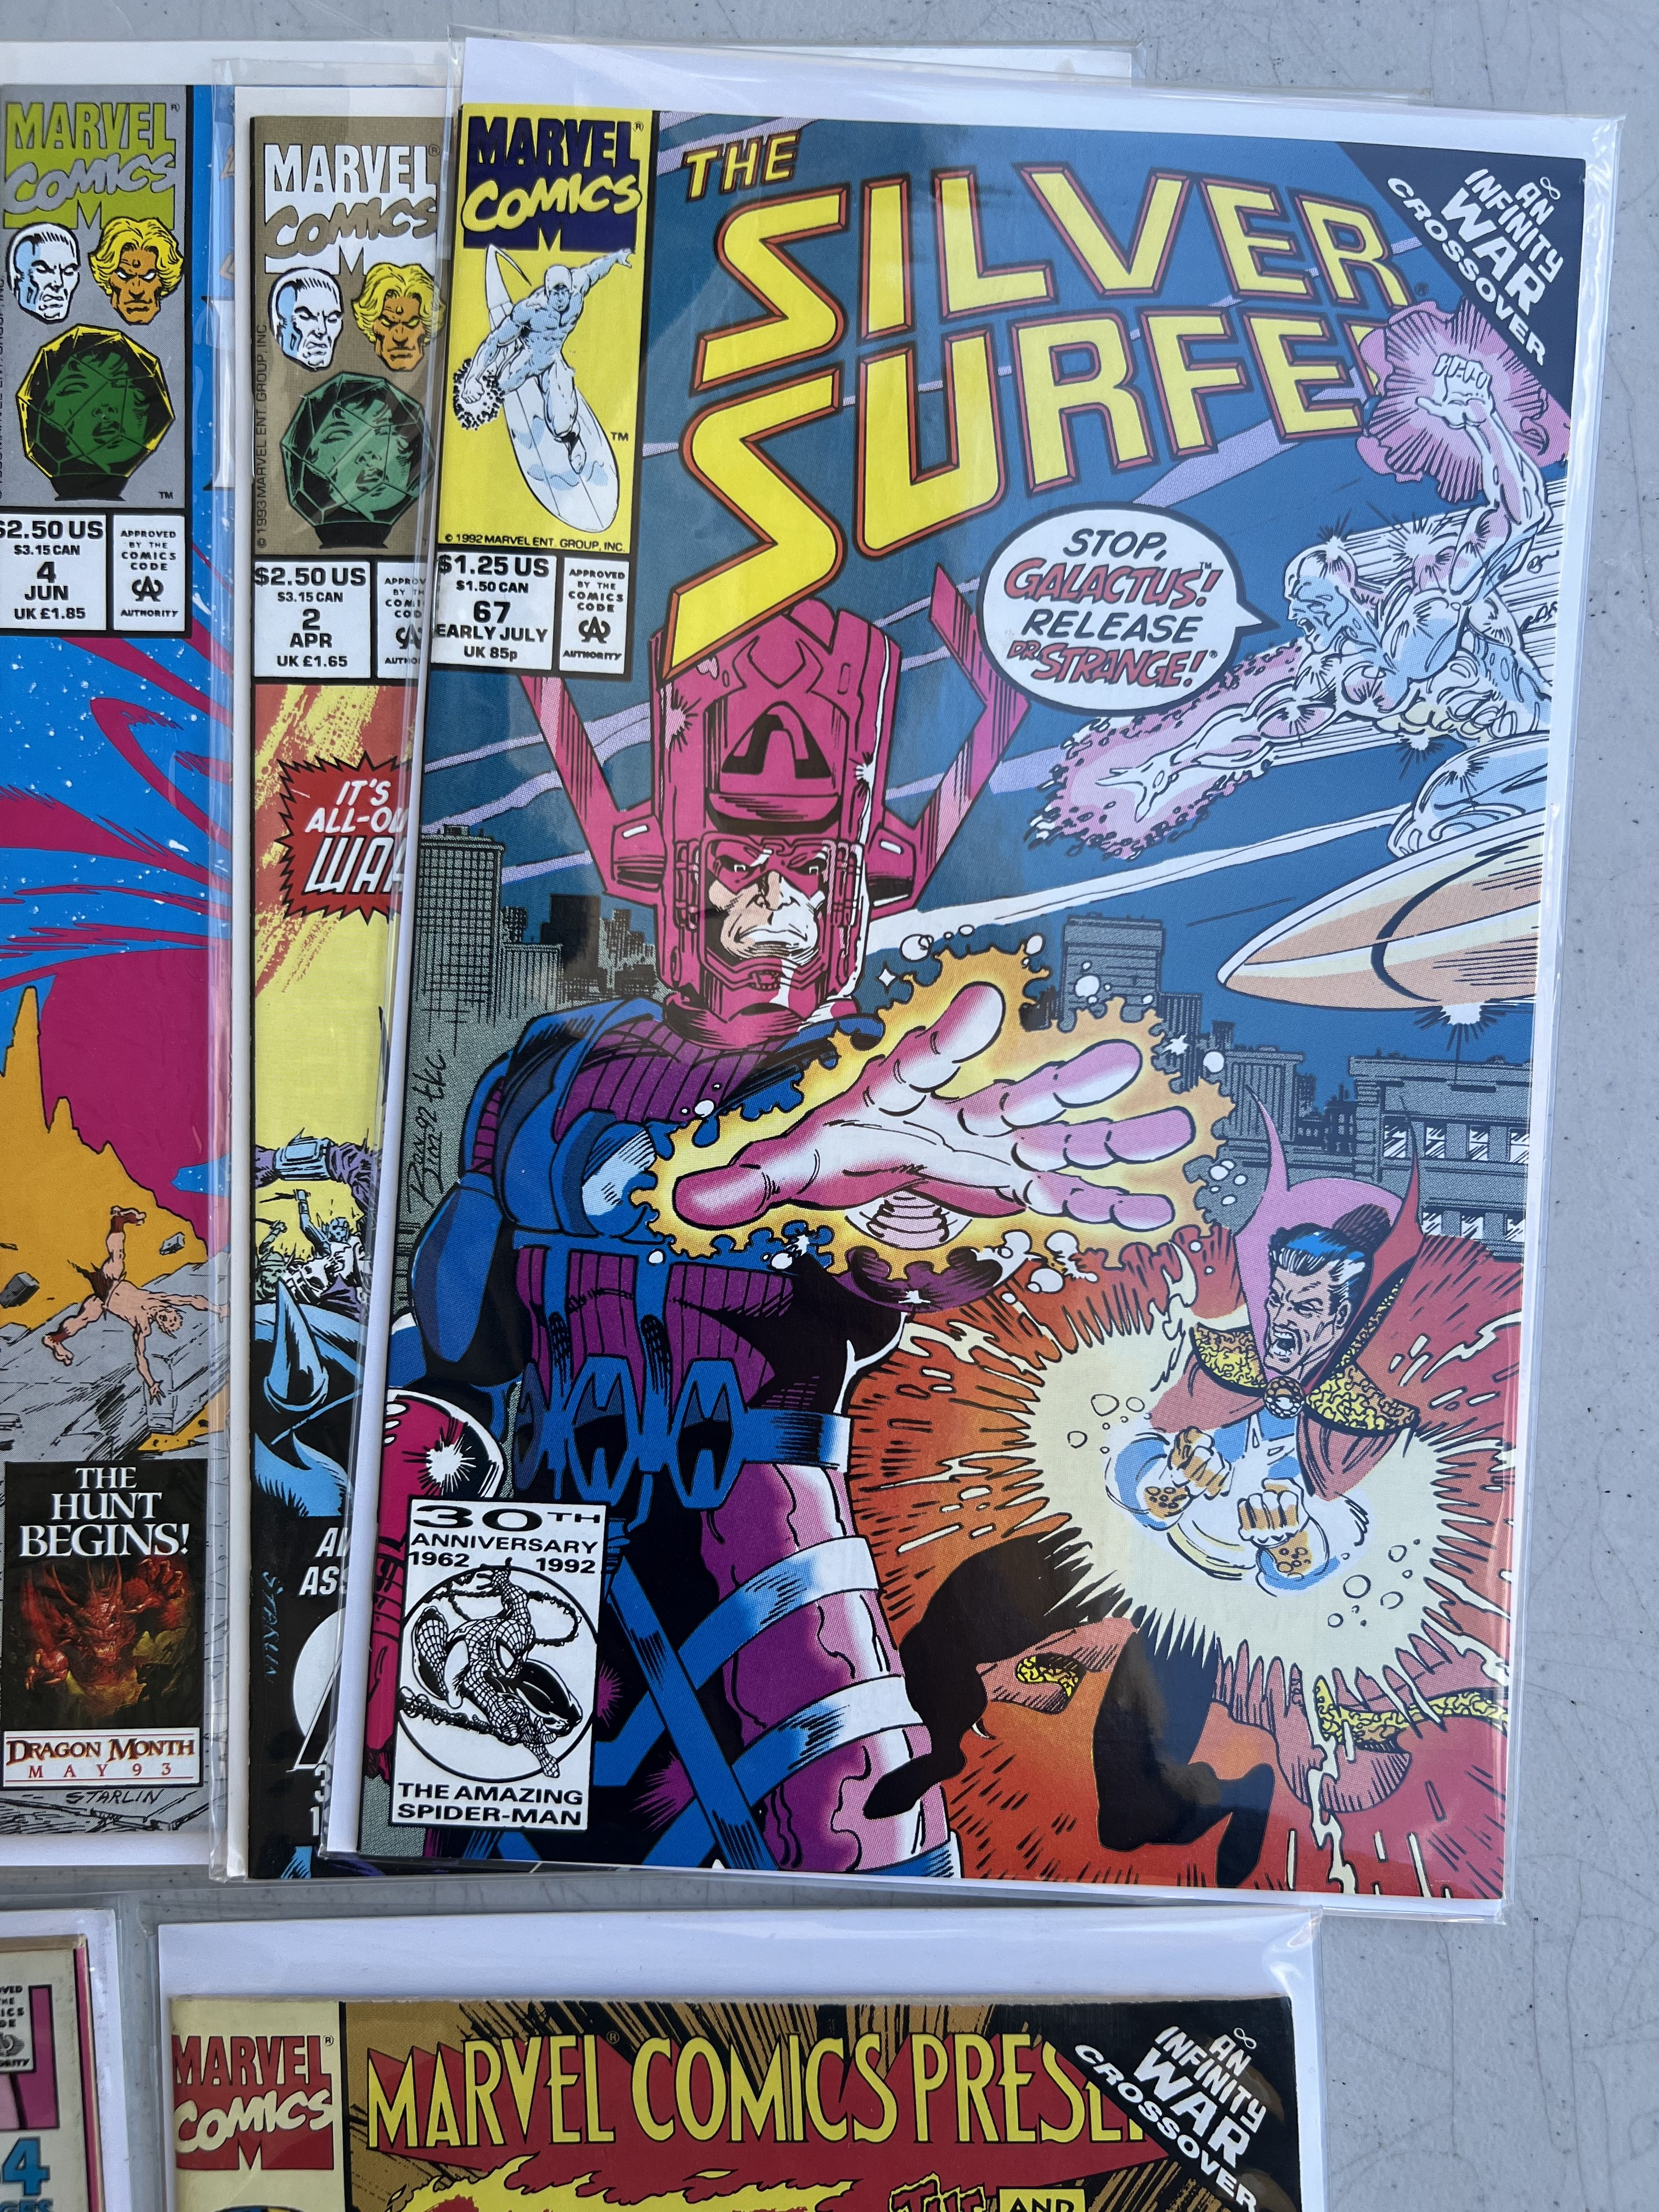 Comic Book Silver Surfer collection lot 15 Marvel comics